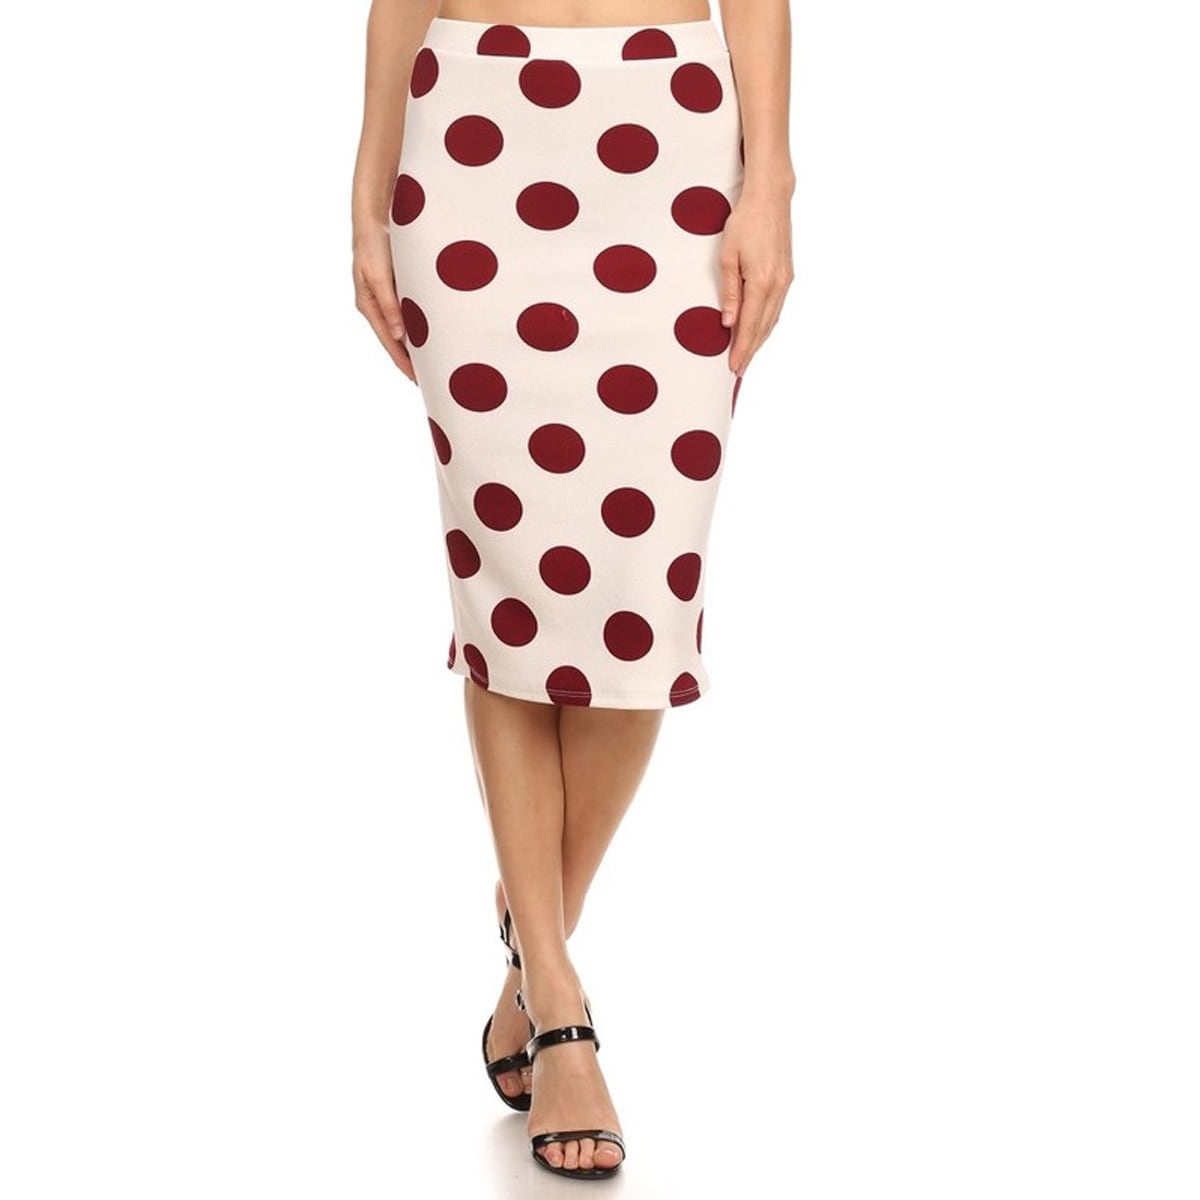 Shop Moa Collection Polka Dot Pencil Skirt On Sale Free Shipping On Orders Over 45